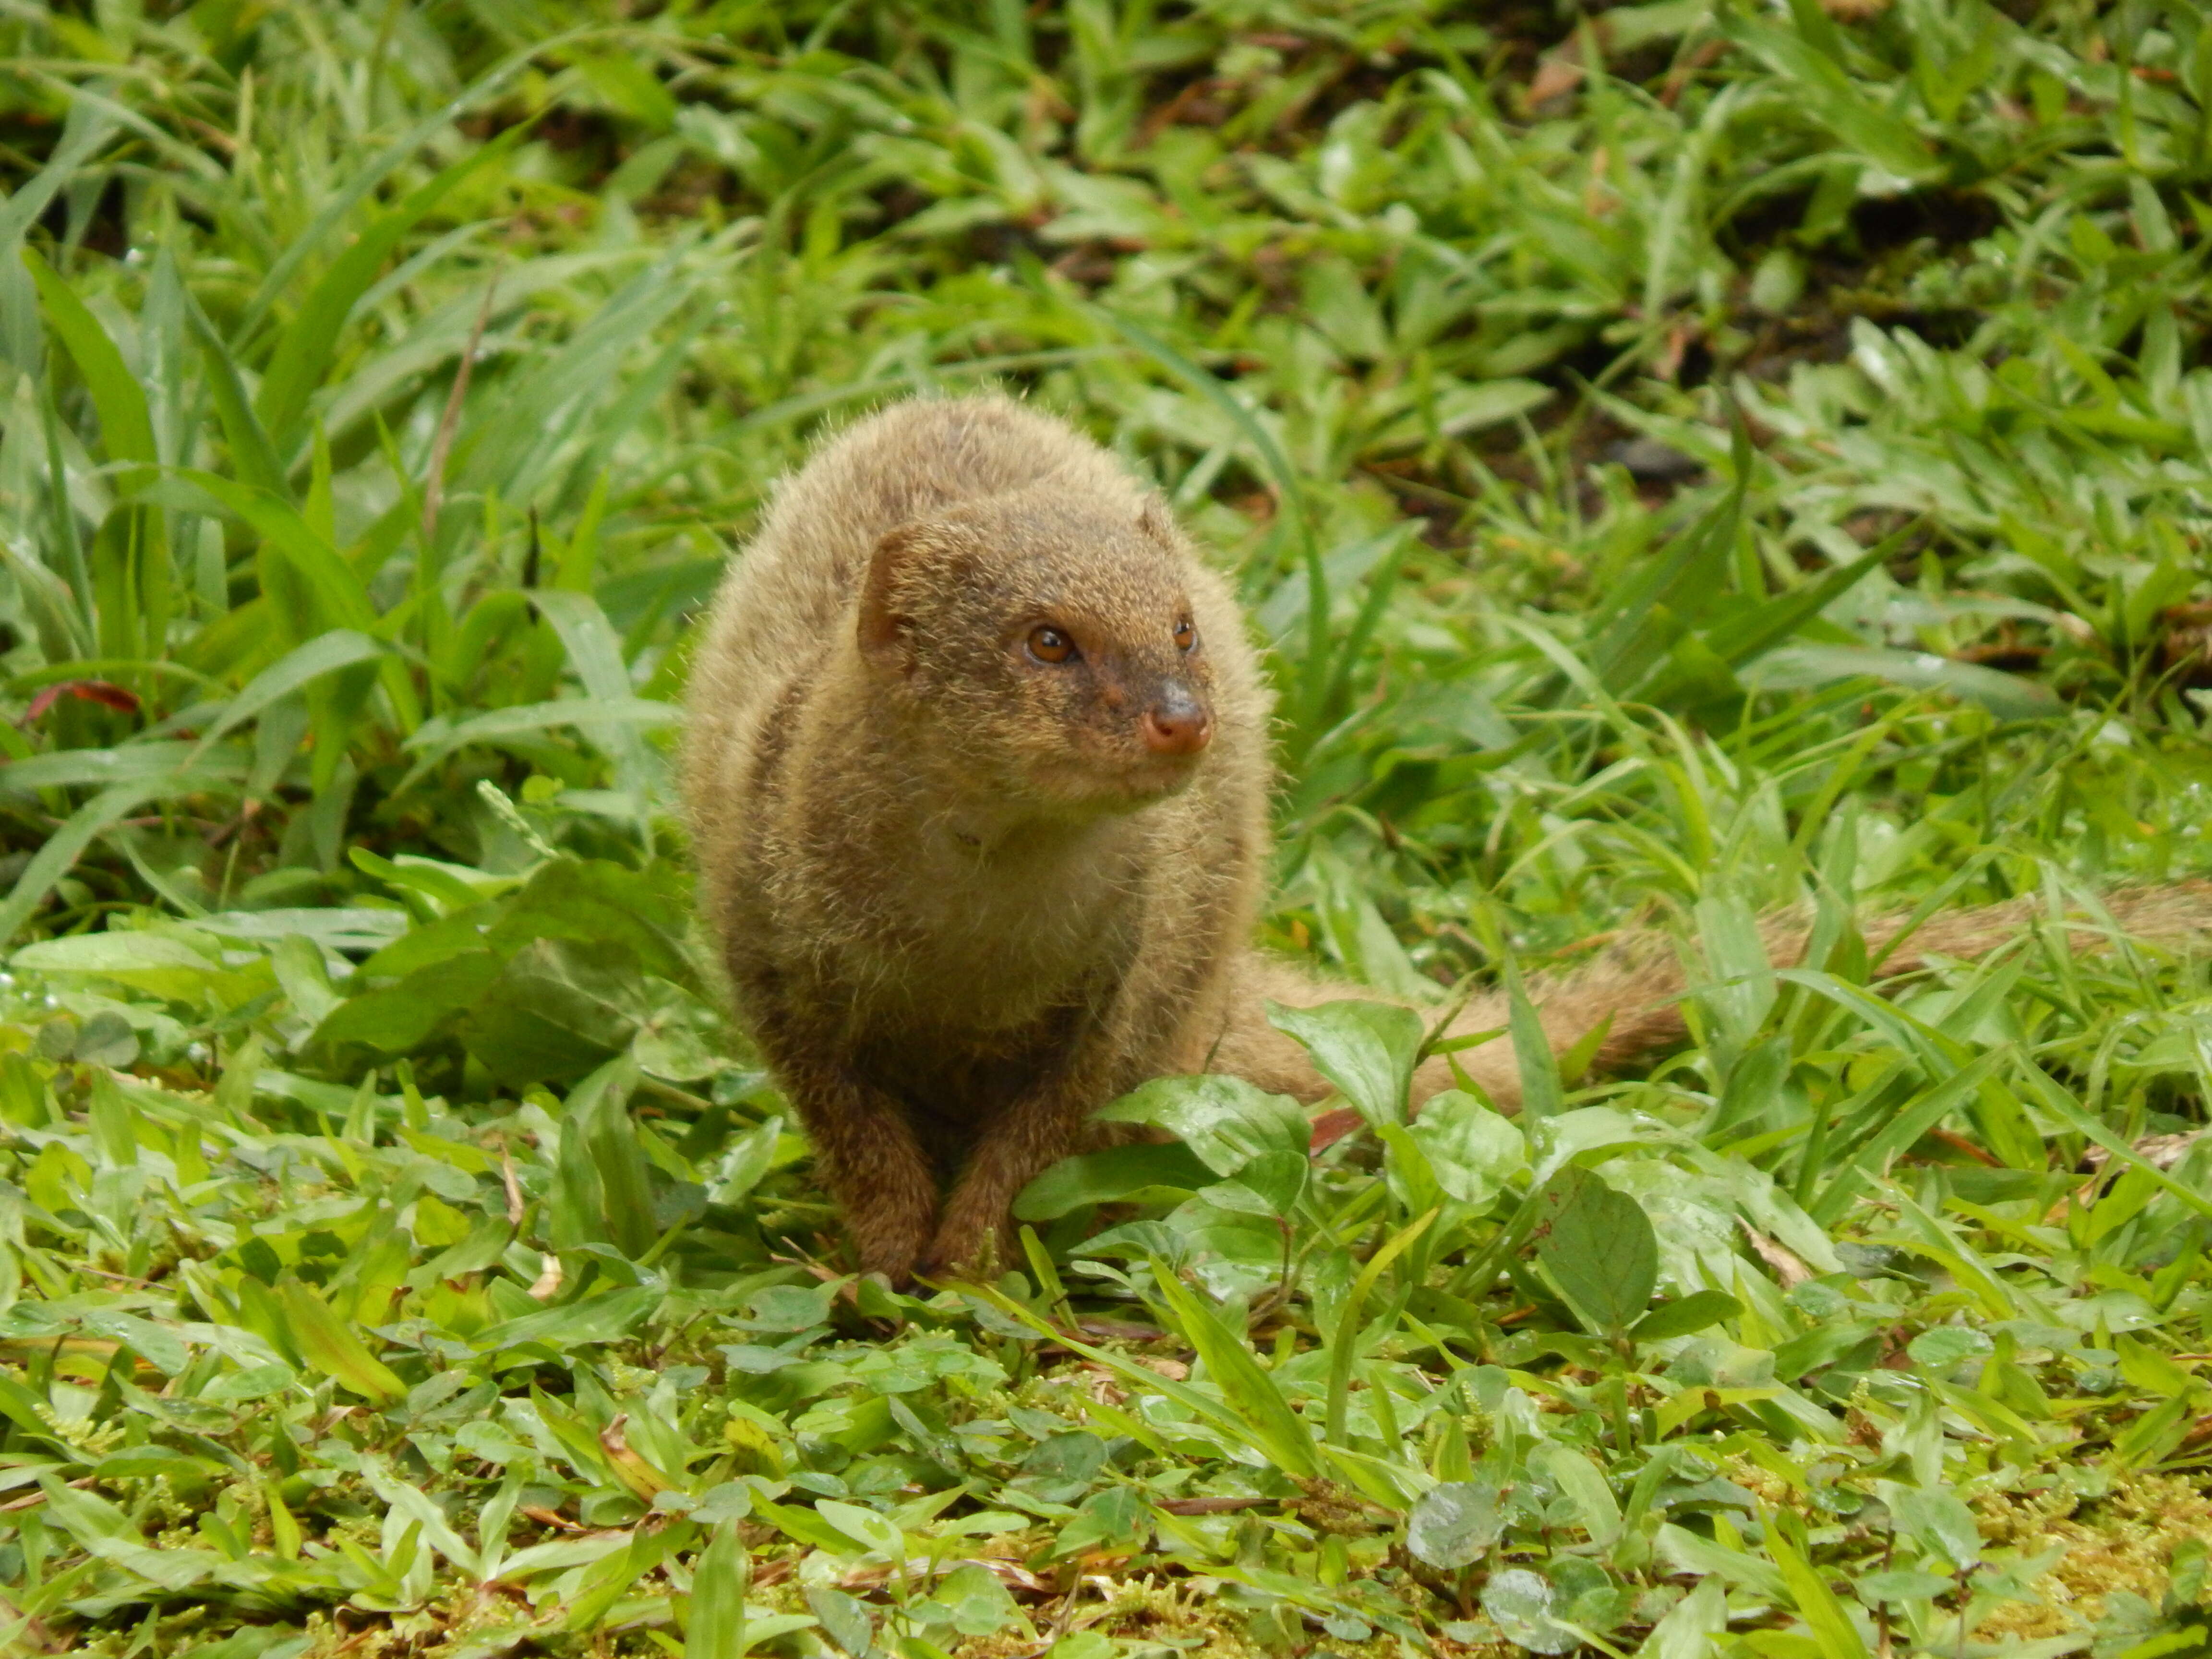 Image of Gold-speckled mongoose